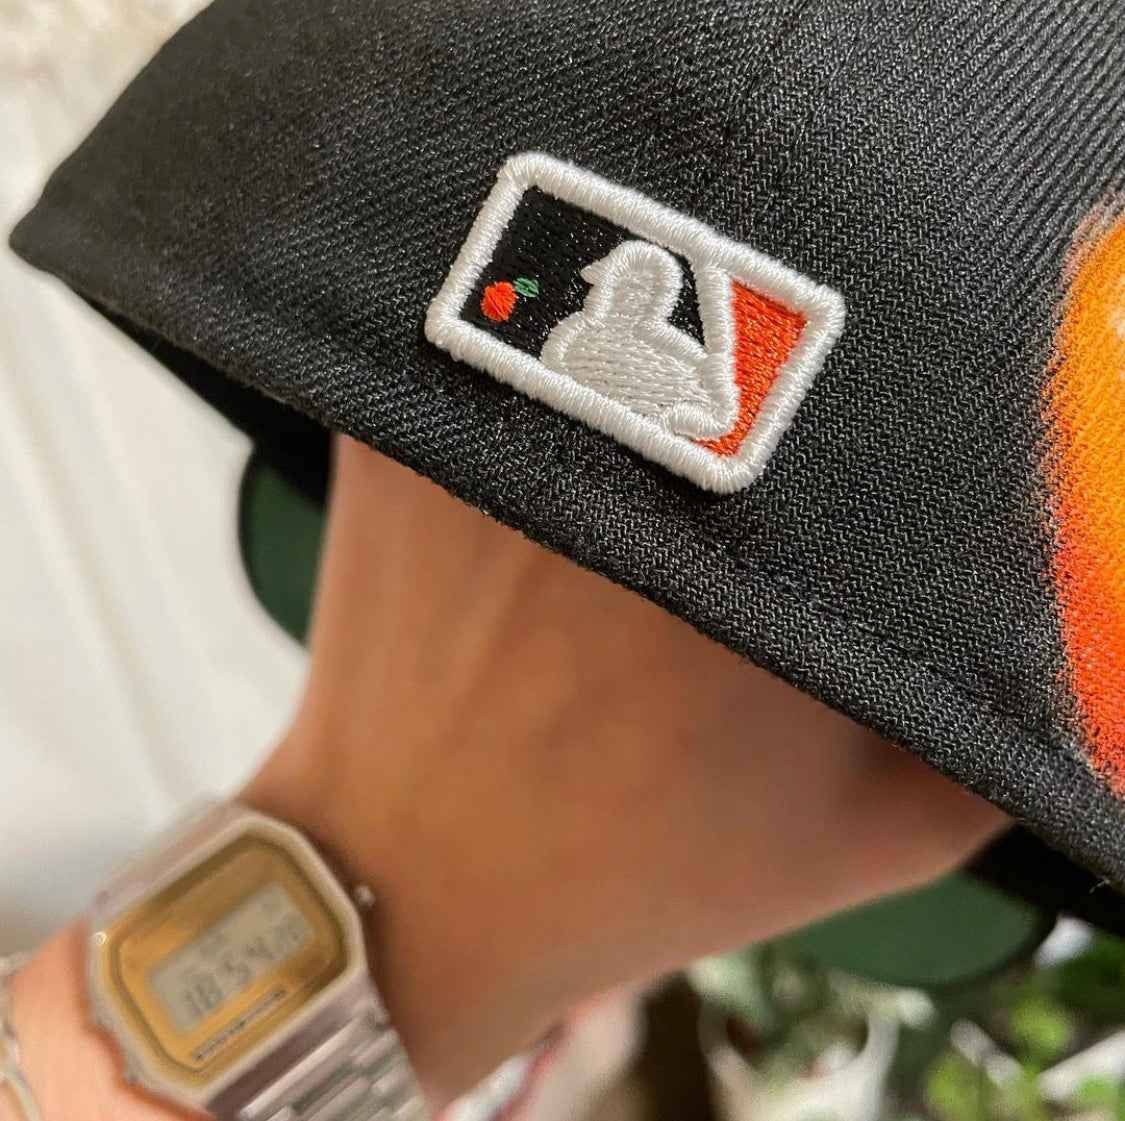 SF Giants 🍊 Fitted cap